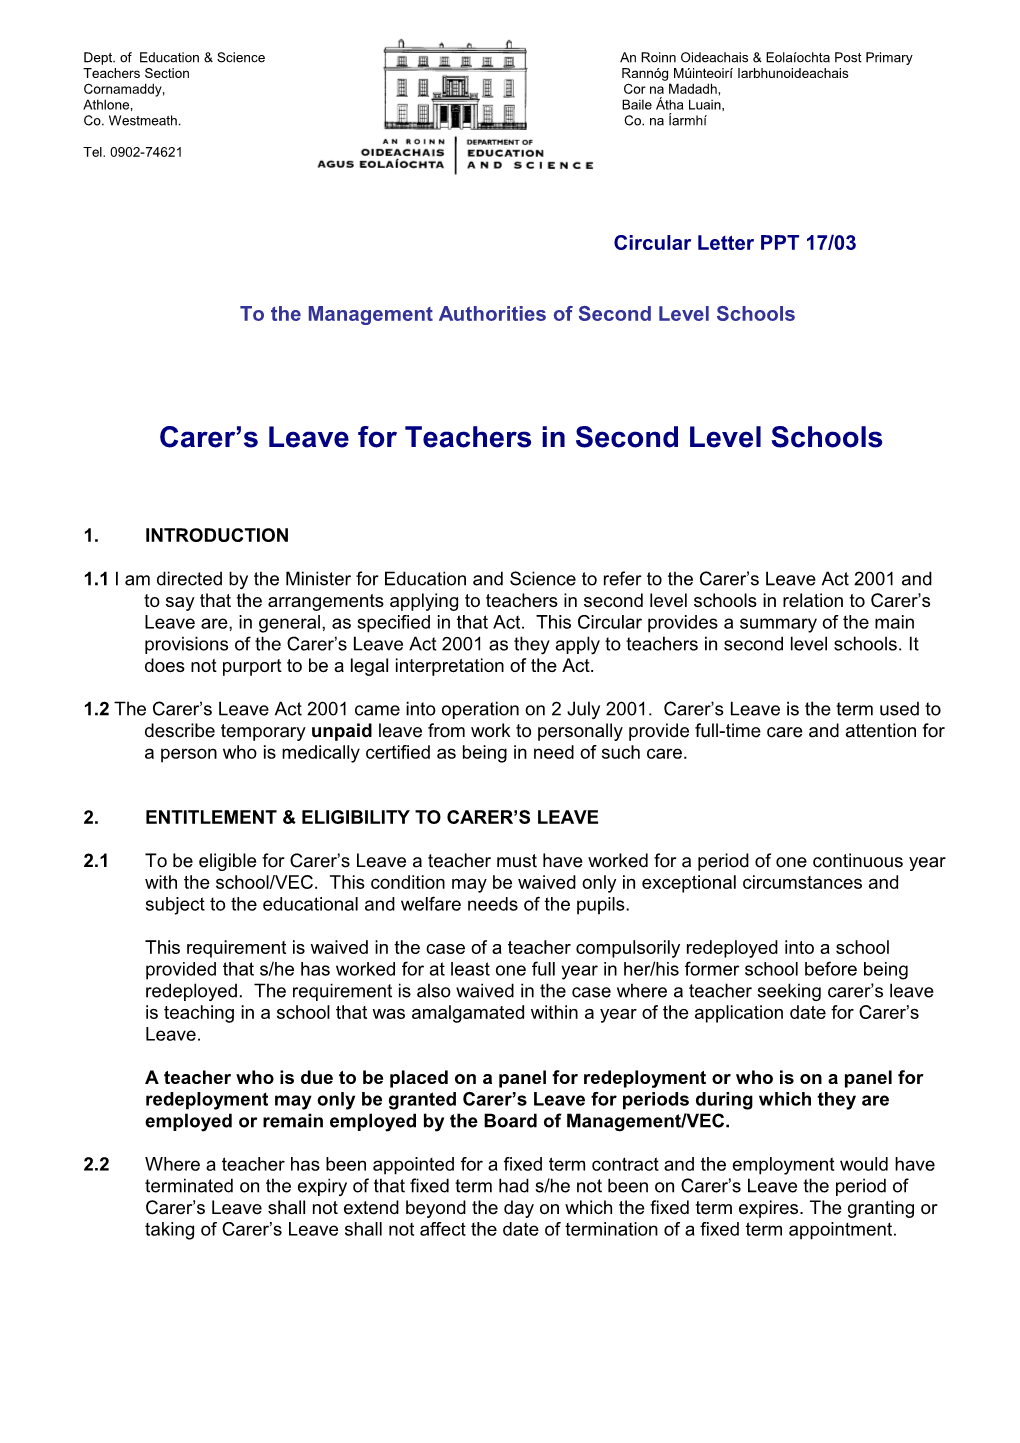 Circular PPT17/03 - Carer S Leave for Teachers in Second Level Schools (File Format Word 136KB)